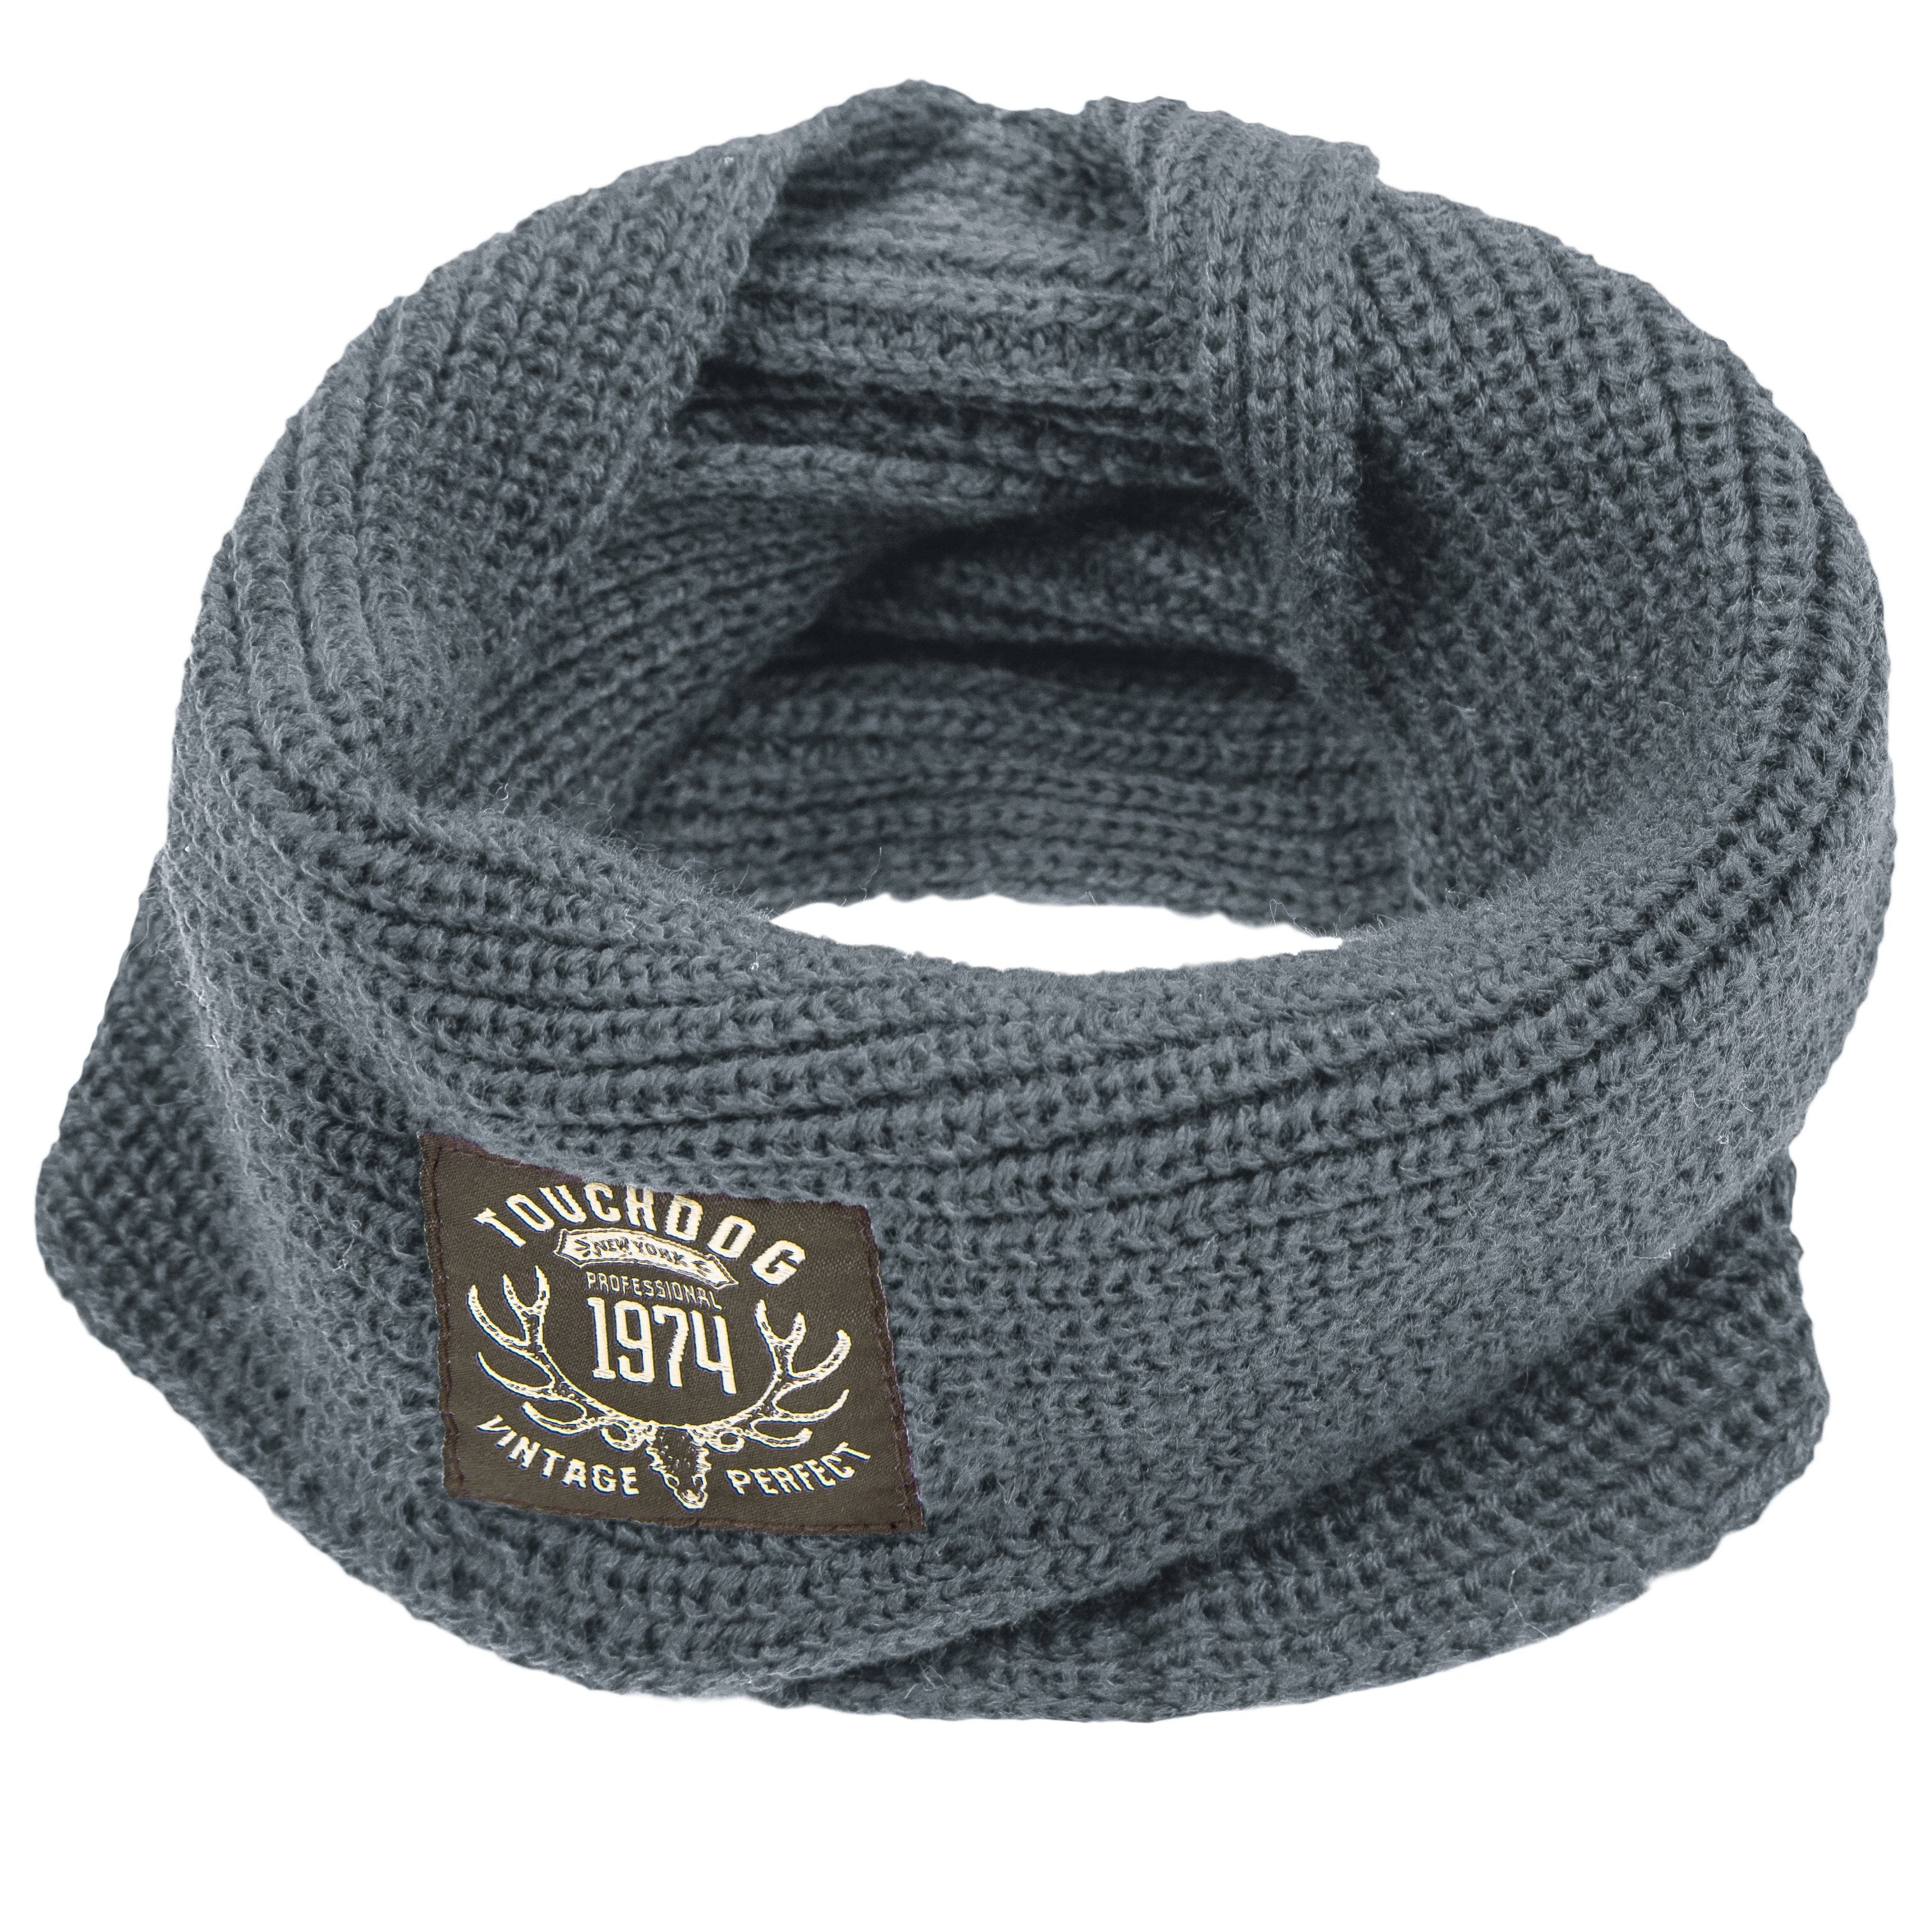 Touchdog Heavy Knitted Winter Dog Scarf - One Size - Grey